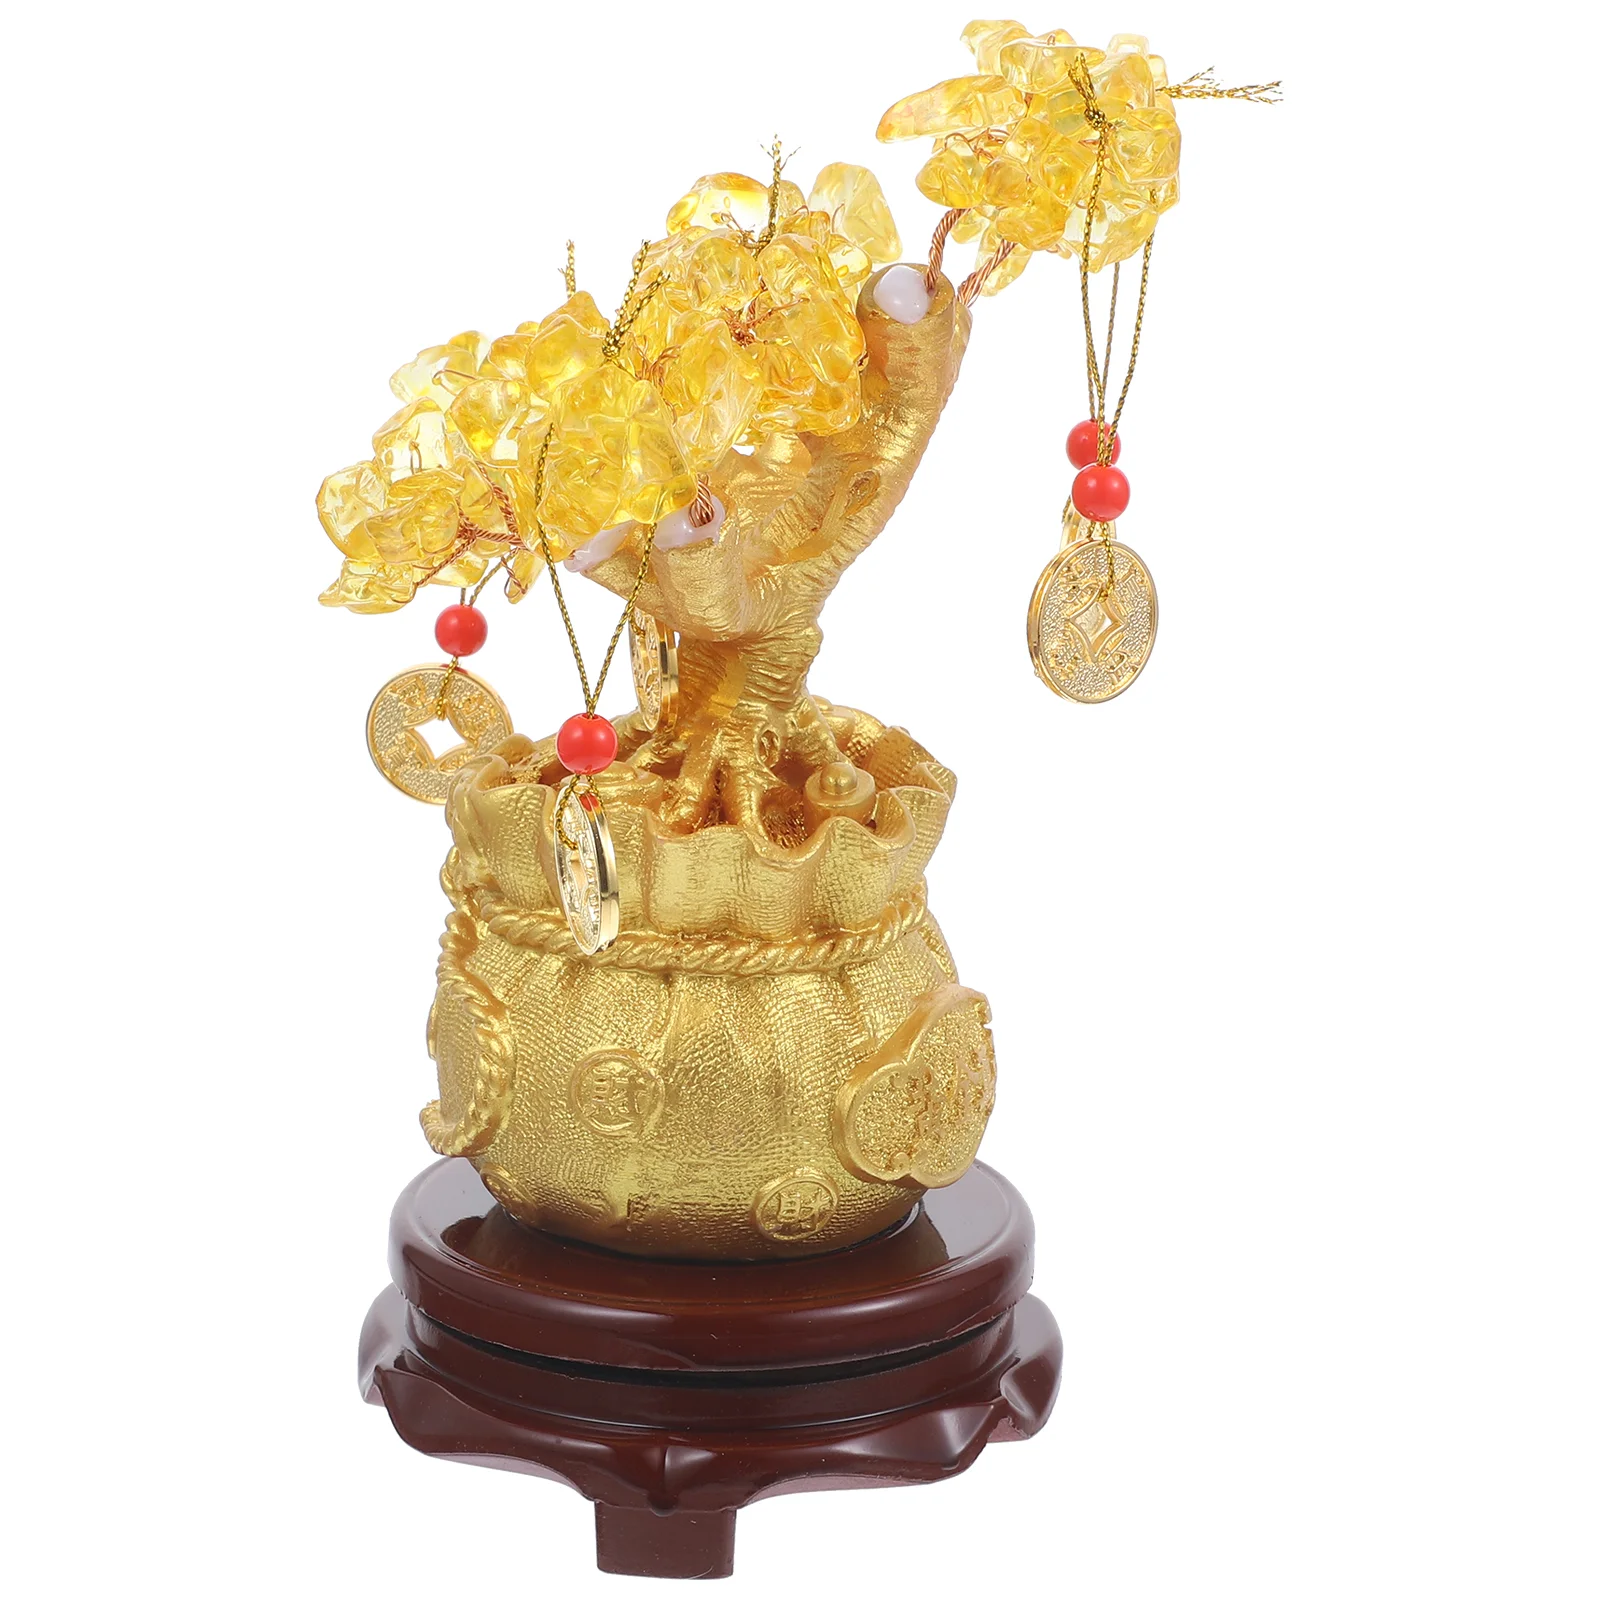 

Fengshui Golden Tree Citrine Gemstone Tree Natural Stone Fortune Chinese Wealth Decorative Figurine for Home Office